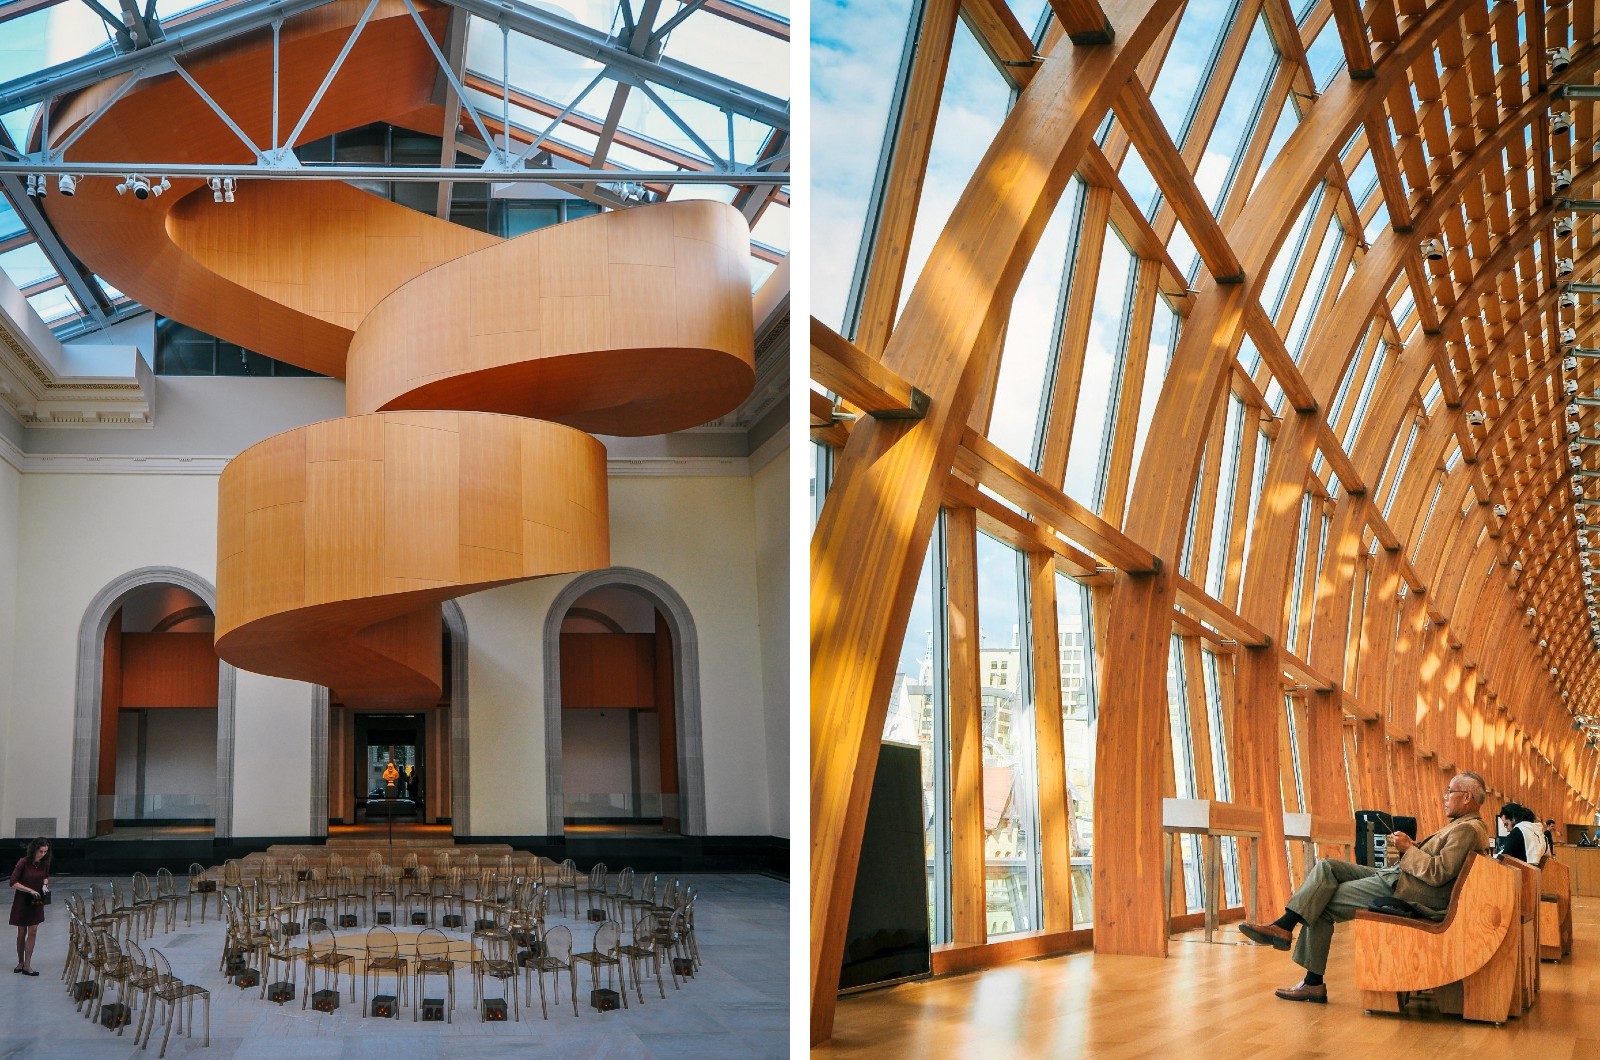 The Art Gallery of Ontario | Frank Gehry